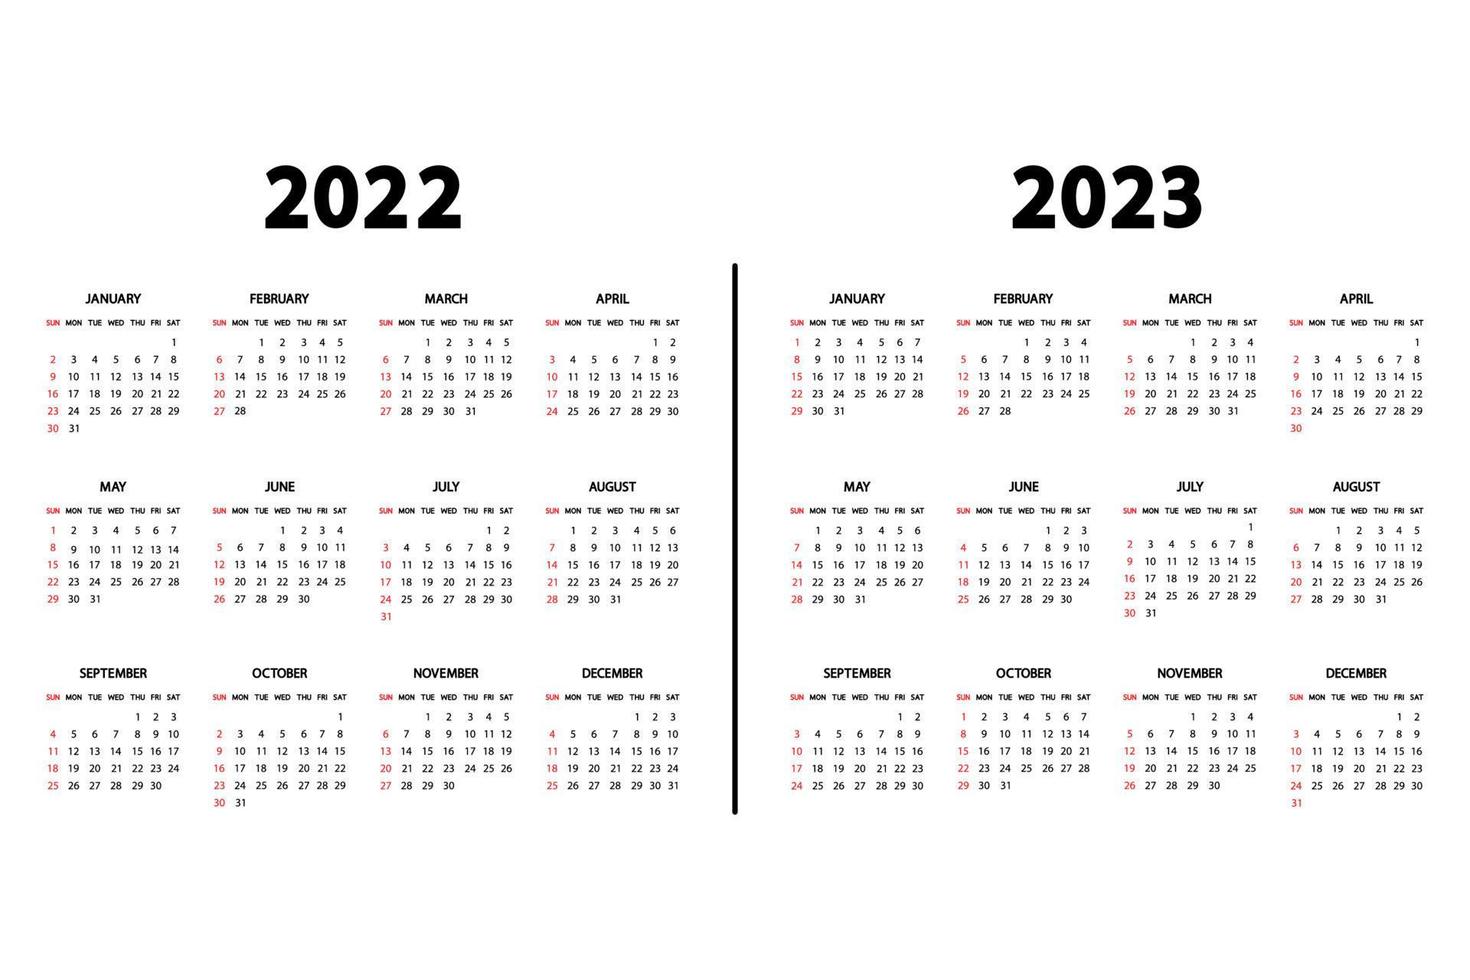 Calendar English 2022 and 2023 years. The week starts Sunday. Annual calendar 2022, 2023 template. Stationery vertical template in simple, minimal design. Portrait orientation vector